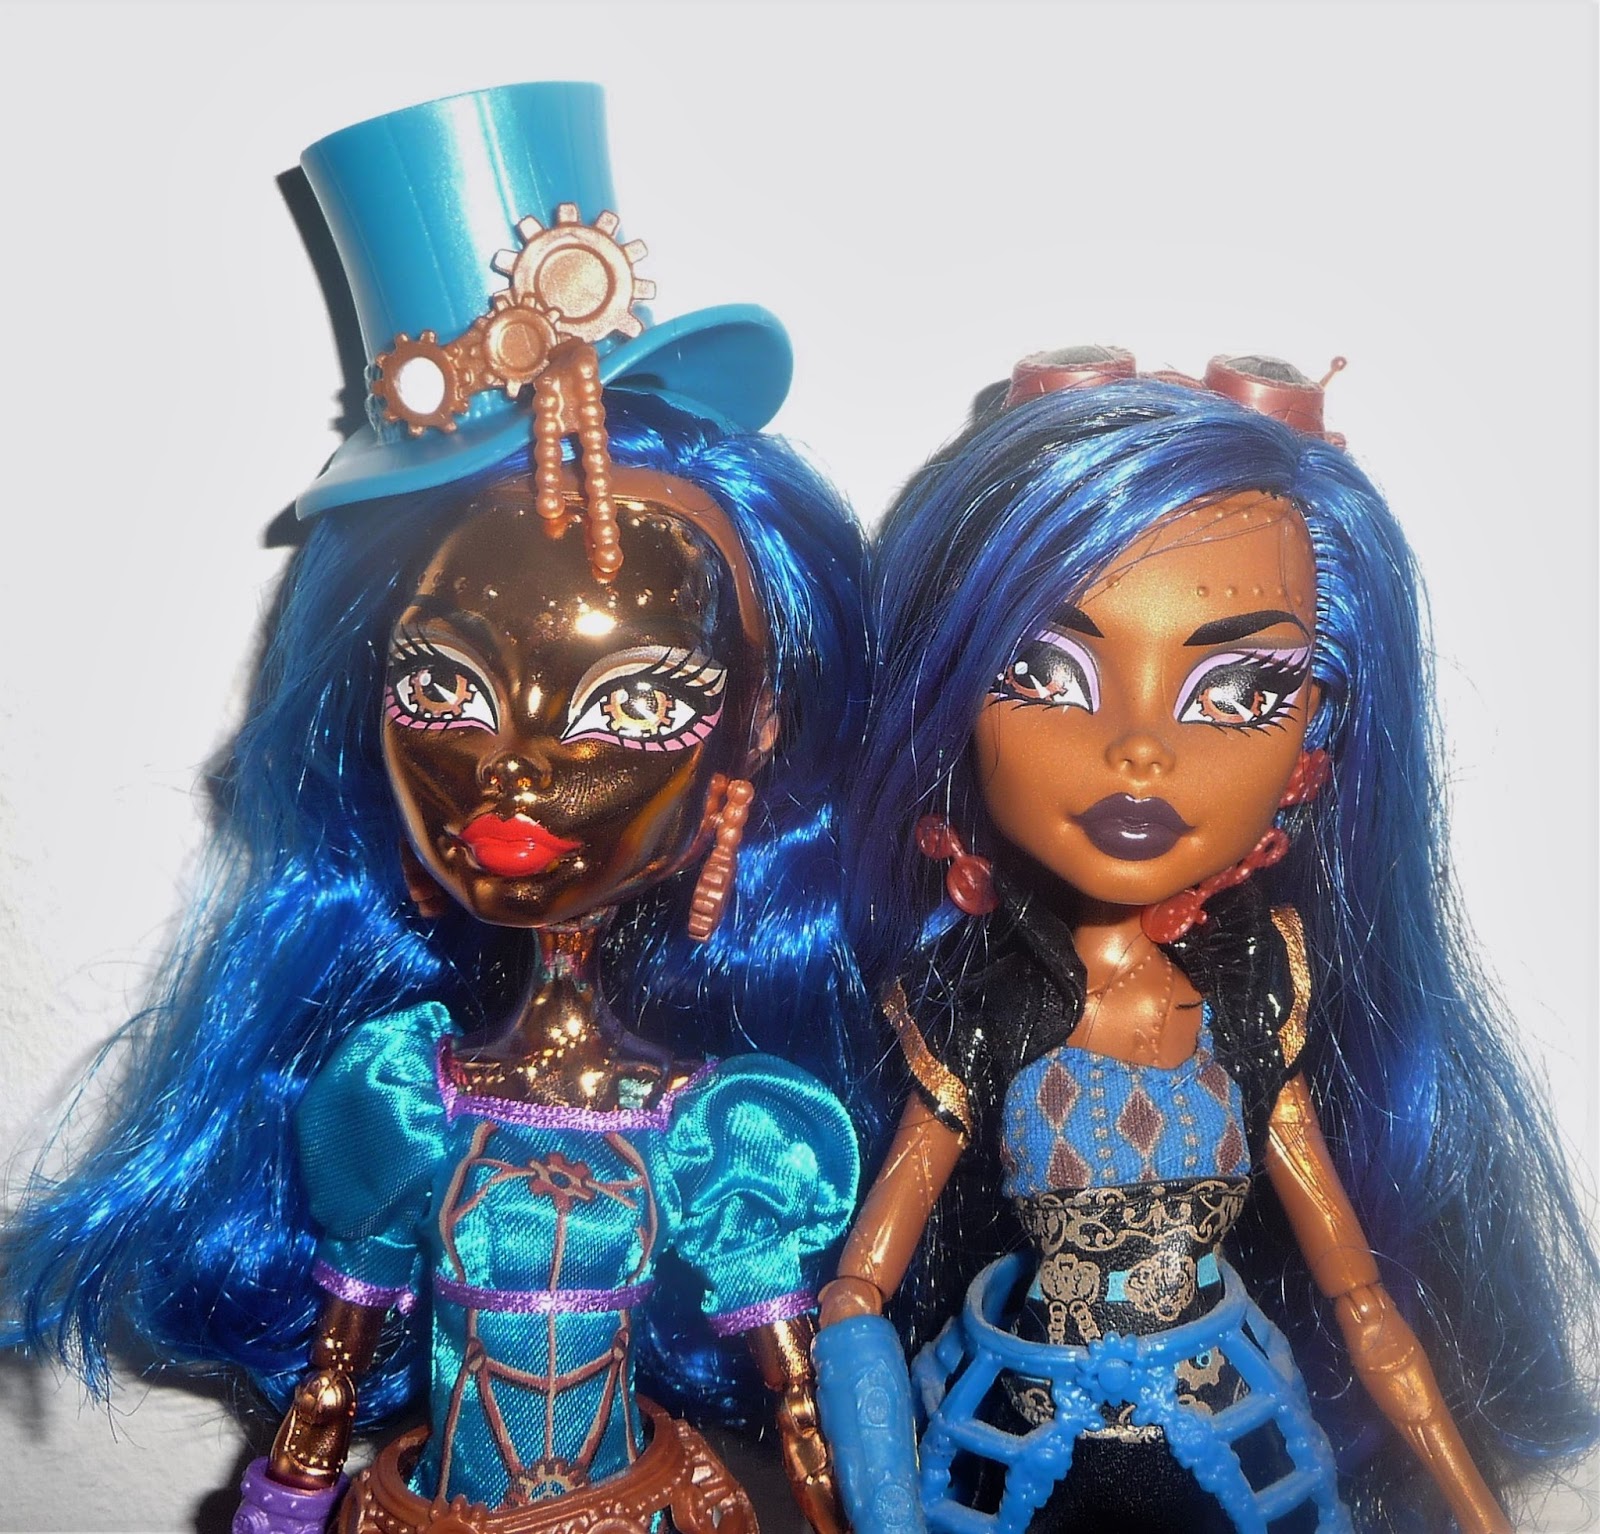 Monster high SDCC Robecca and Hexiciah Steam 2 pack - Comic con exclusive.